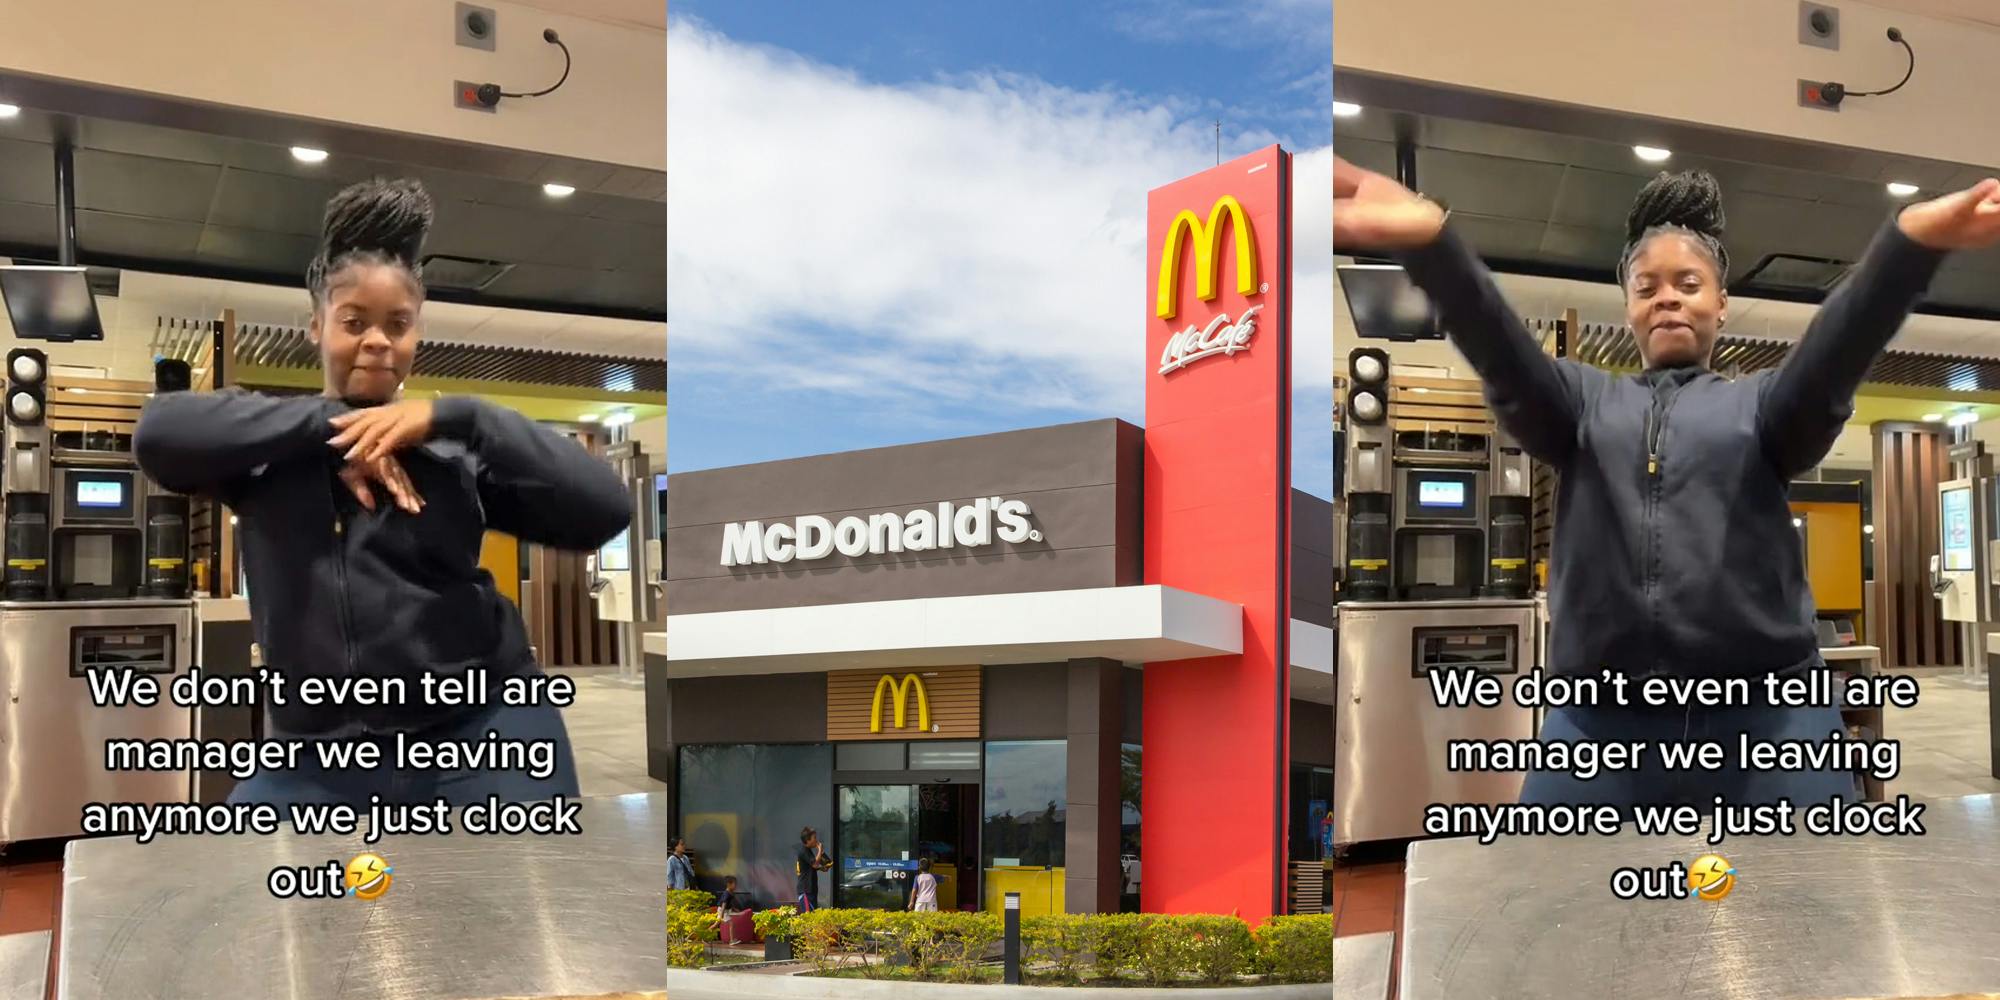 McDonald's employee dancing with caption "We don't even tell our manager we leaving anymore we just clock out" (l) McDonald's building with signs and blue sky (c) McDonald's employee dancing with caption "We don't even tell our manager we leaving anymore we just clock out" (r)